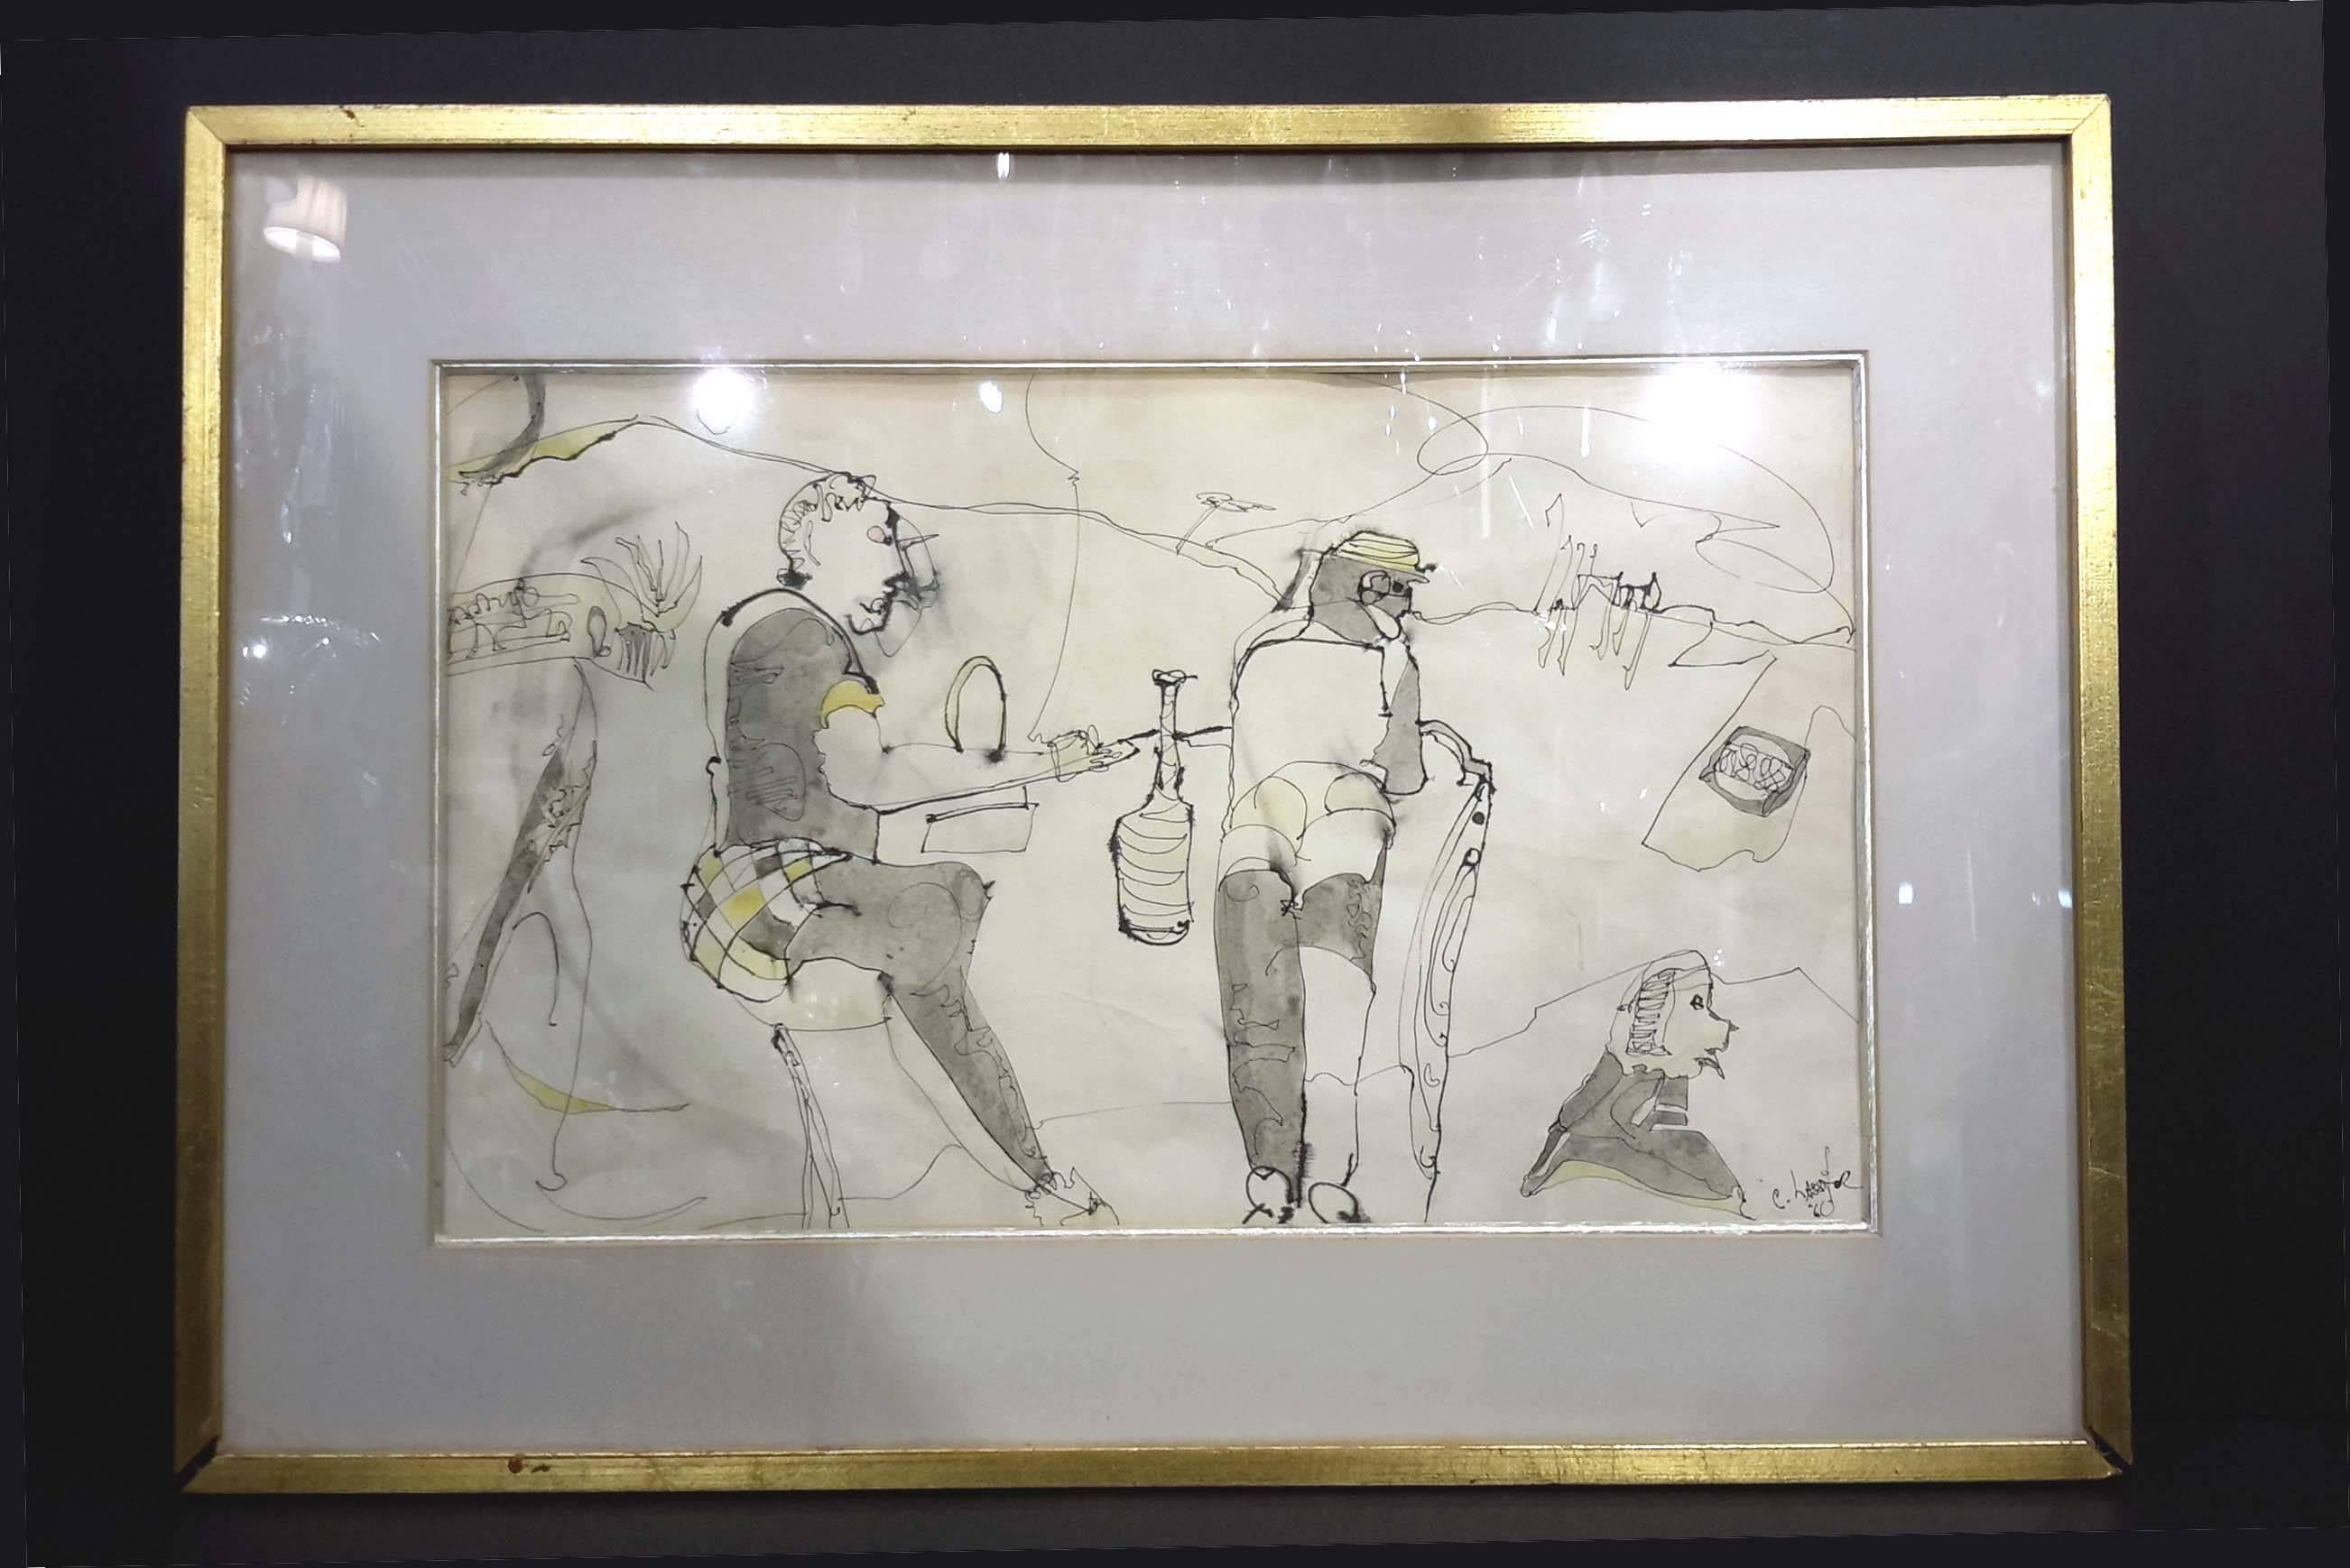 Purchased from a private collector in NYC.
Depicting two men drinking at a bar and a dog in the foreground, possibly painted in Fire Island, New York.
Signed: C. Lassiter, 60
Charles Keeling Lassiter, American (1926-2005)
Charles Keeling